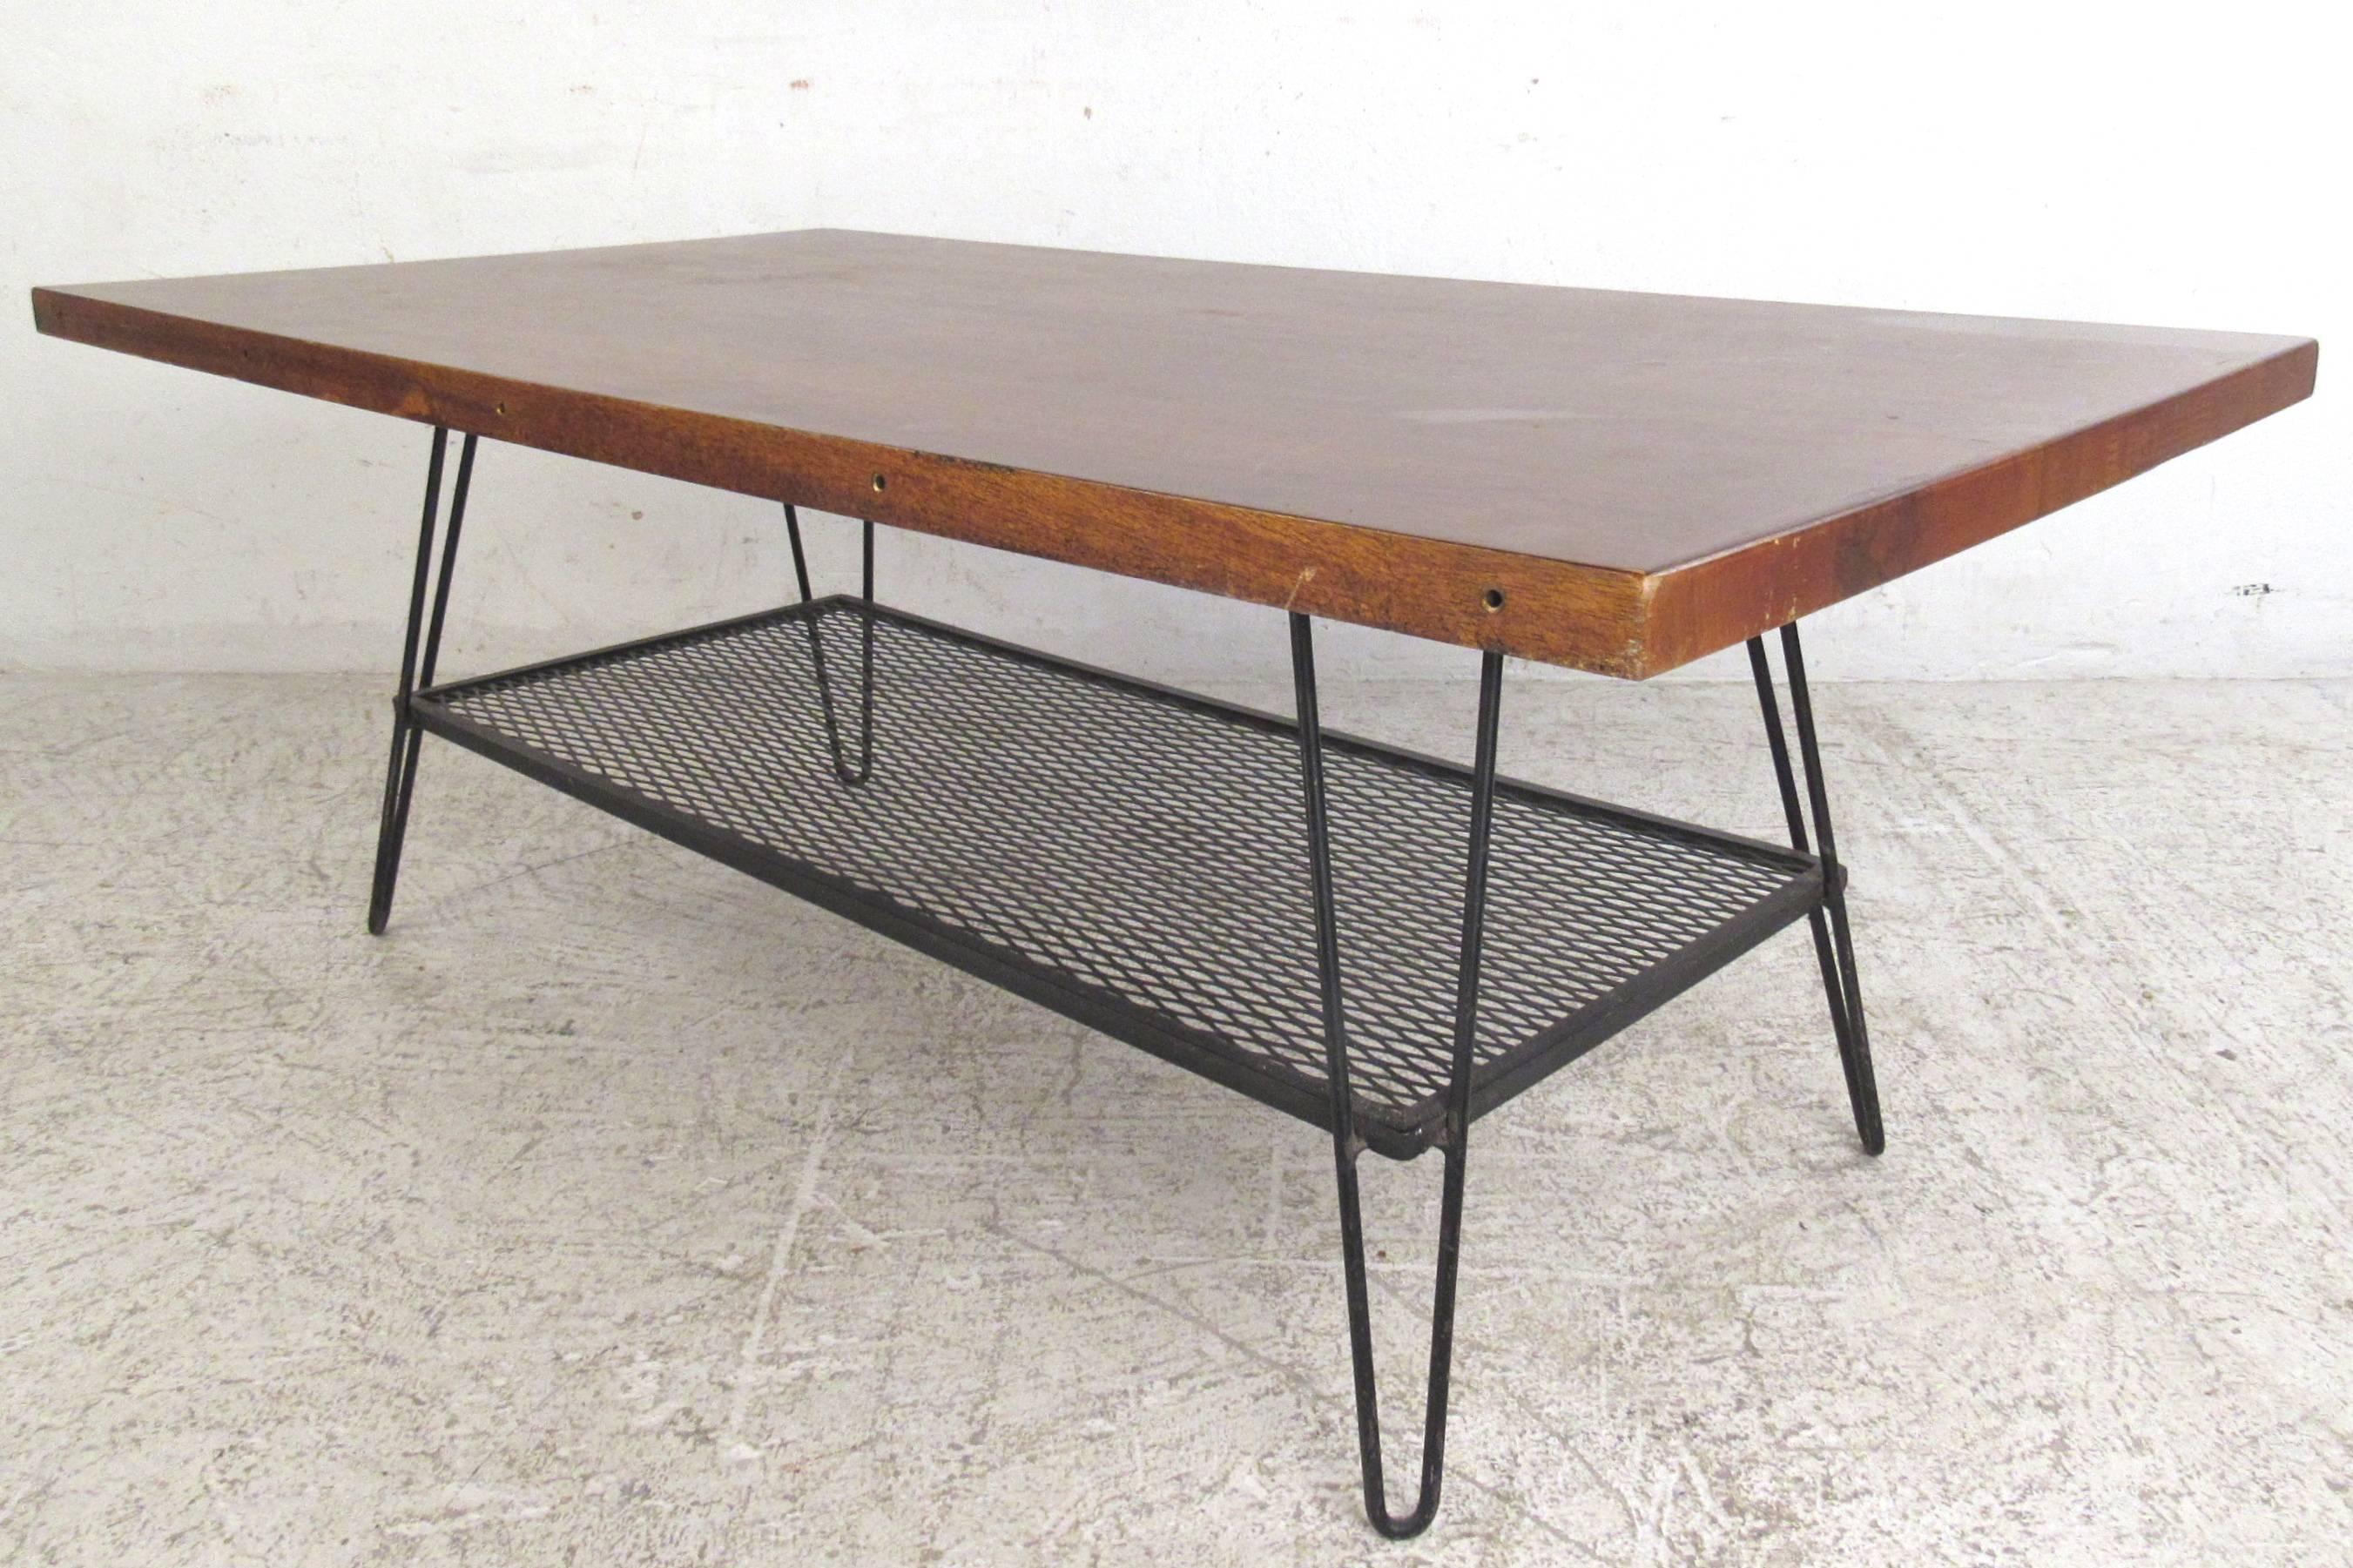 This unique vintage coffee table features a hardwood top with second tier metal shelf. Hairpin legs wonderfully compliment this Industrial style Mid-Century table. Please confirm item location (NY or NJ).